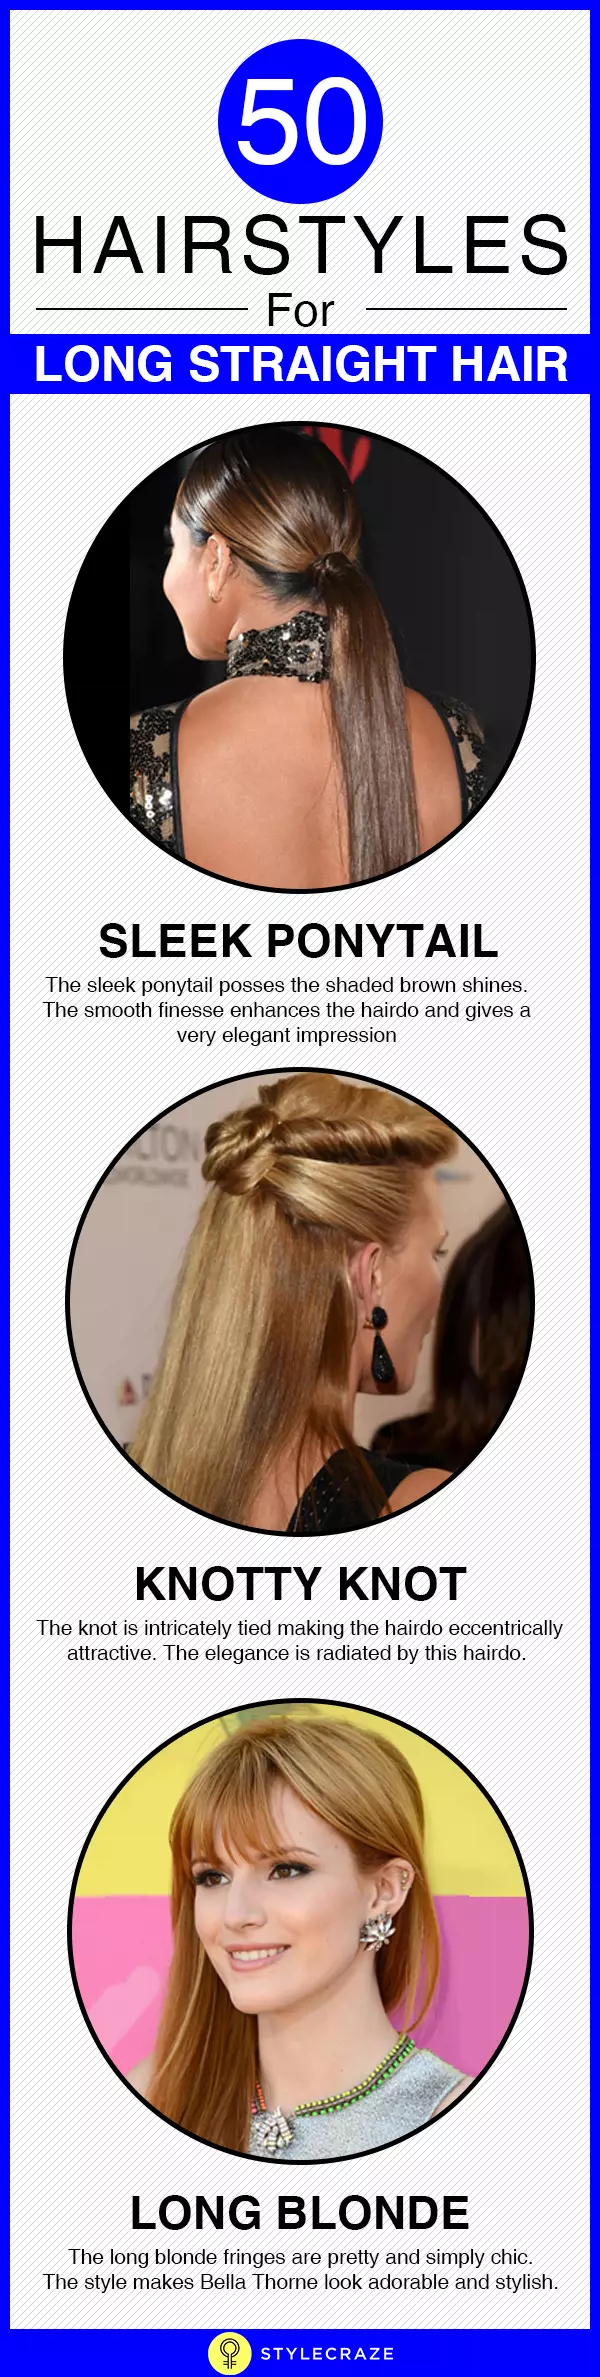 Hairstyles for long straight hair